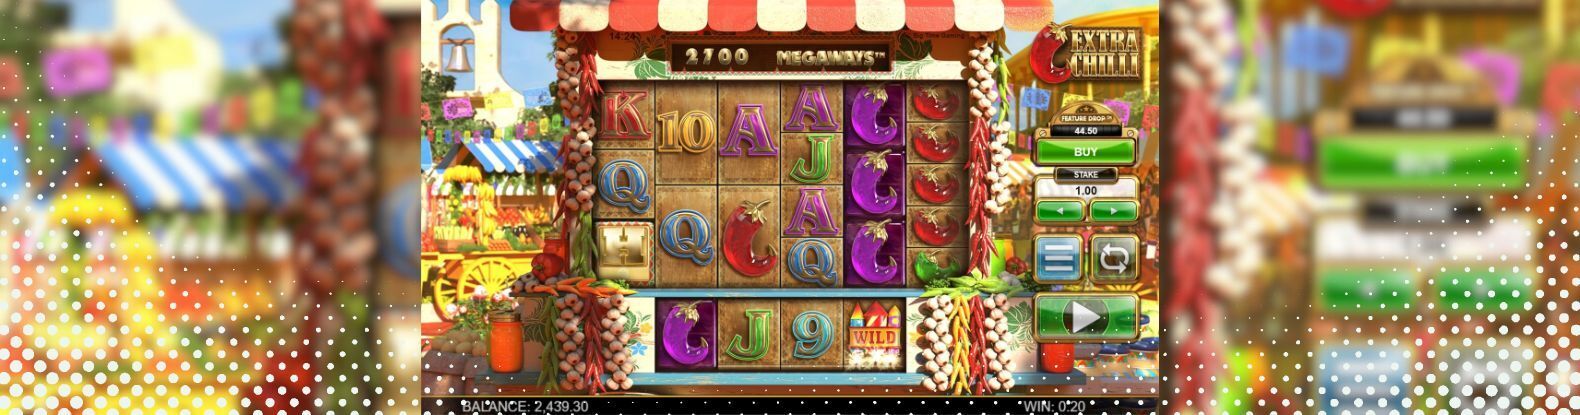 This is a decorative pic of Extra Chilli Pokies Game by Real Time Gaming